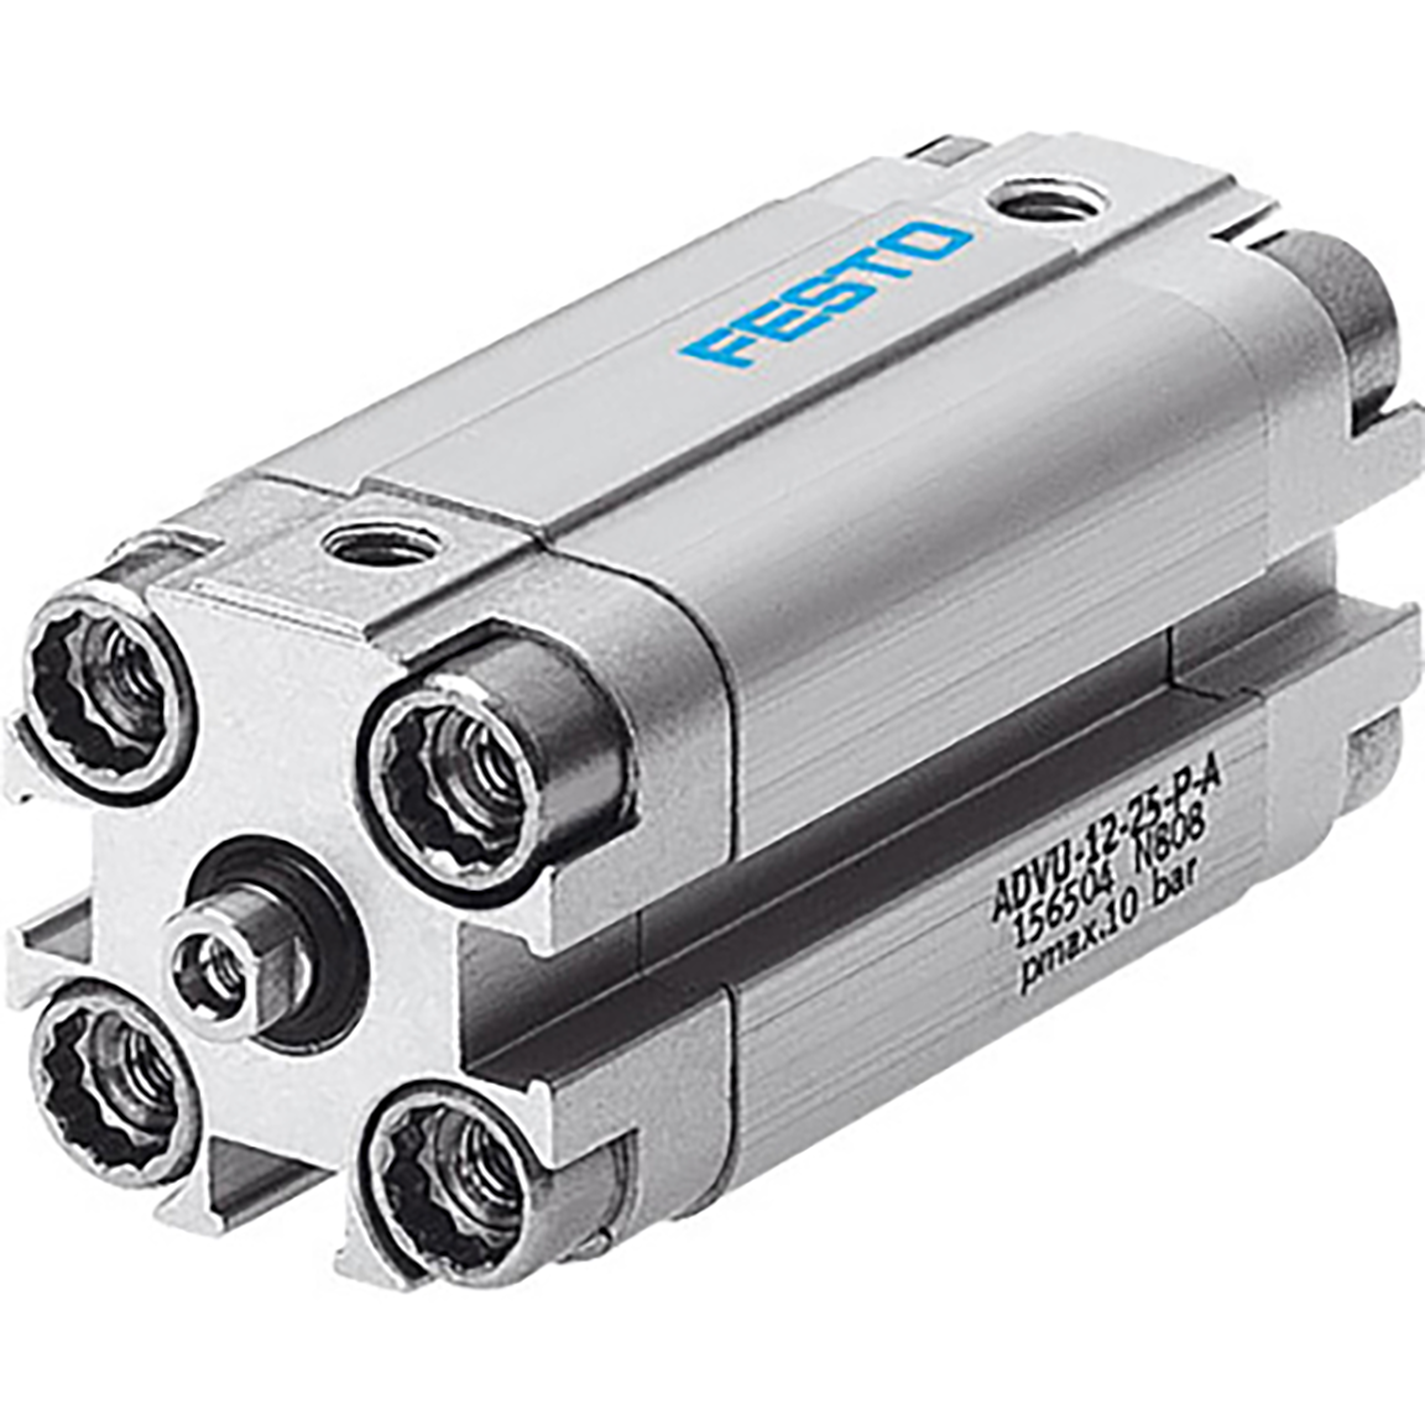 M5 Metric Compact Cylinder